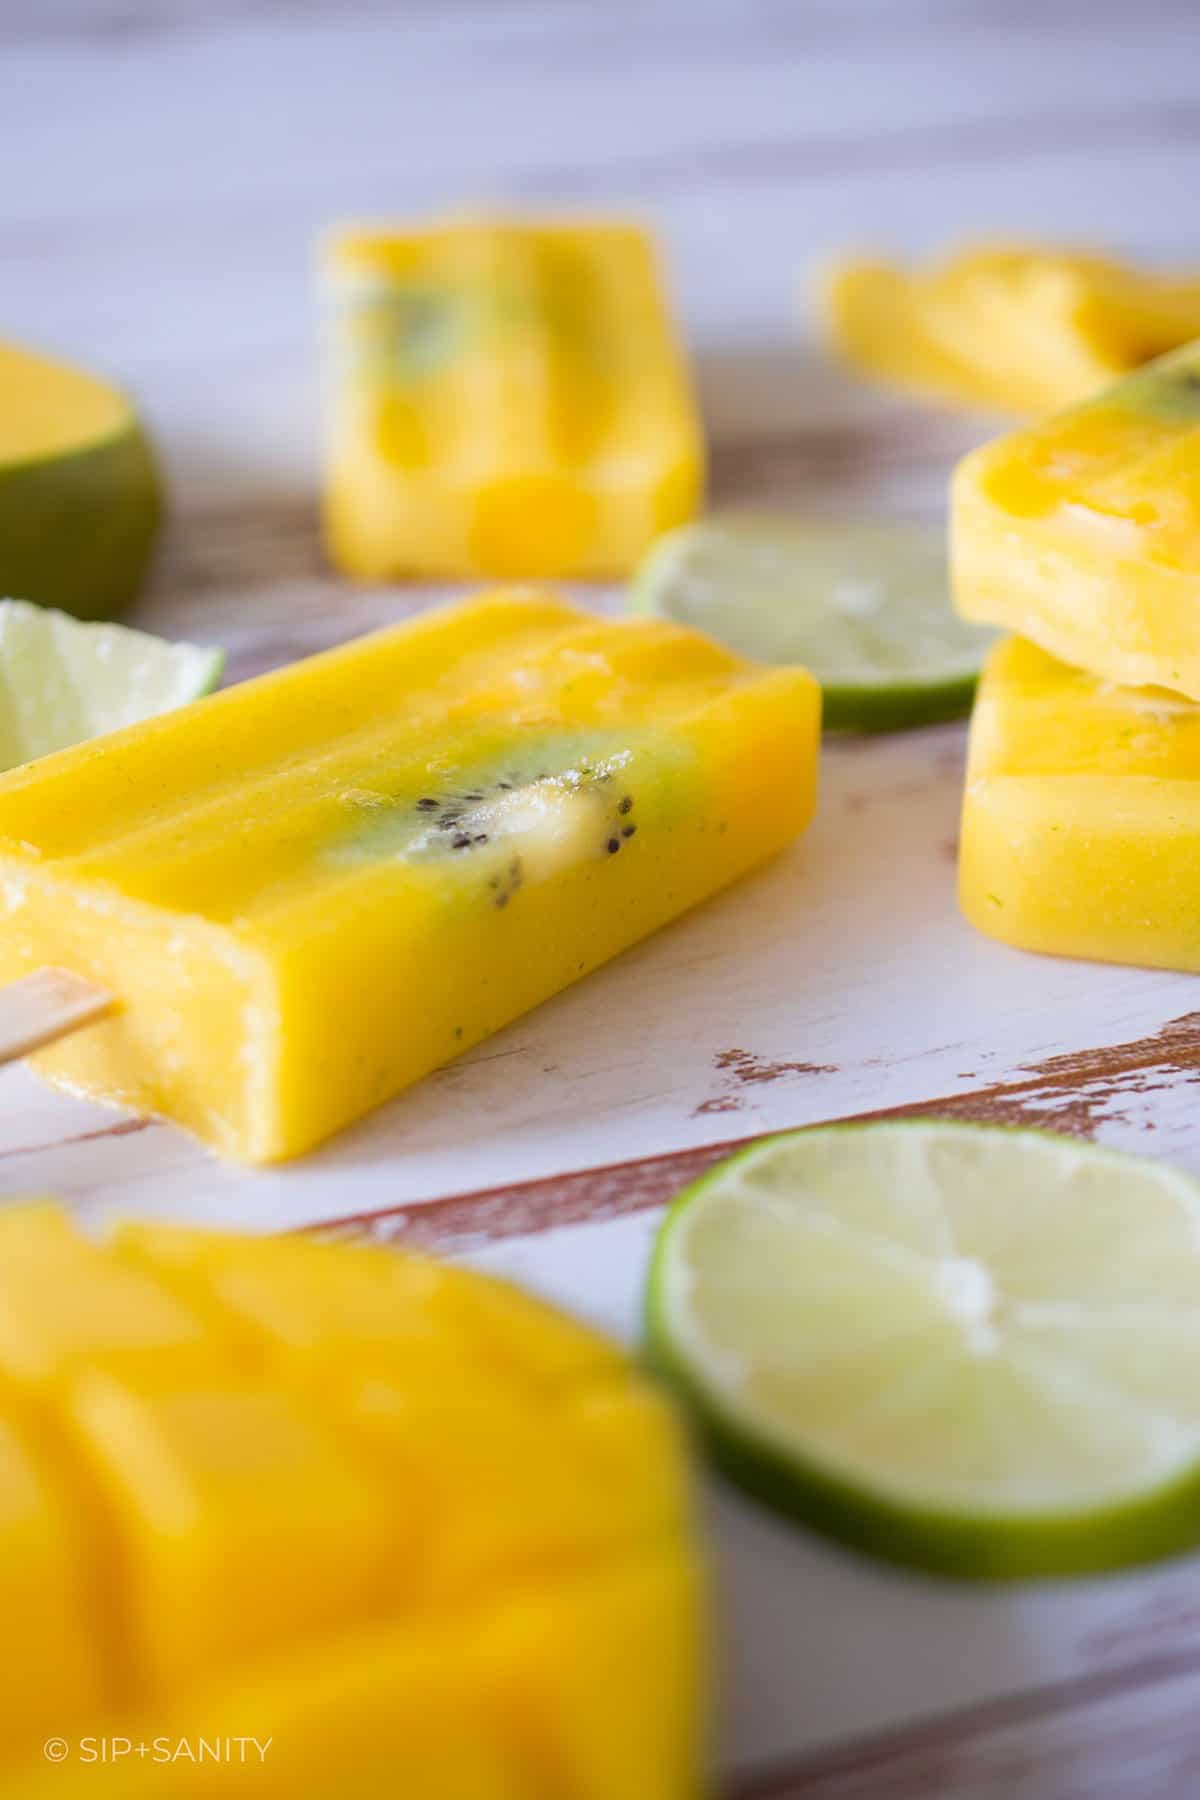 Mango lime popsicles and lime slices on a wooden table.